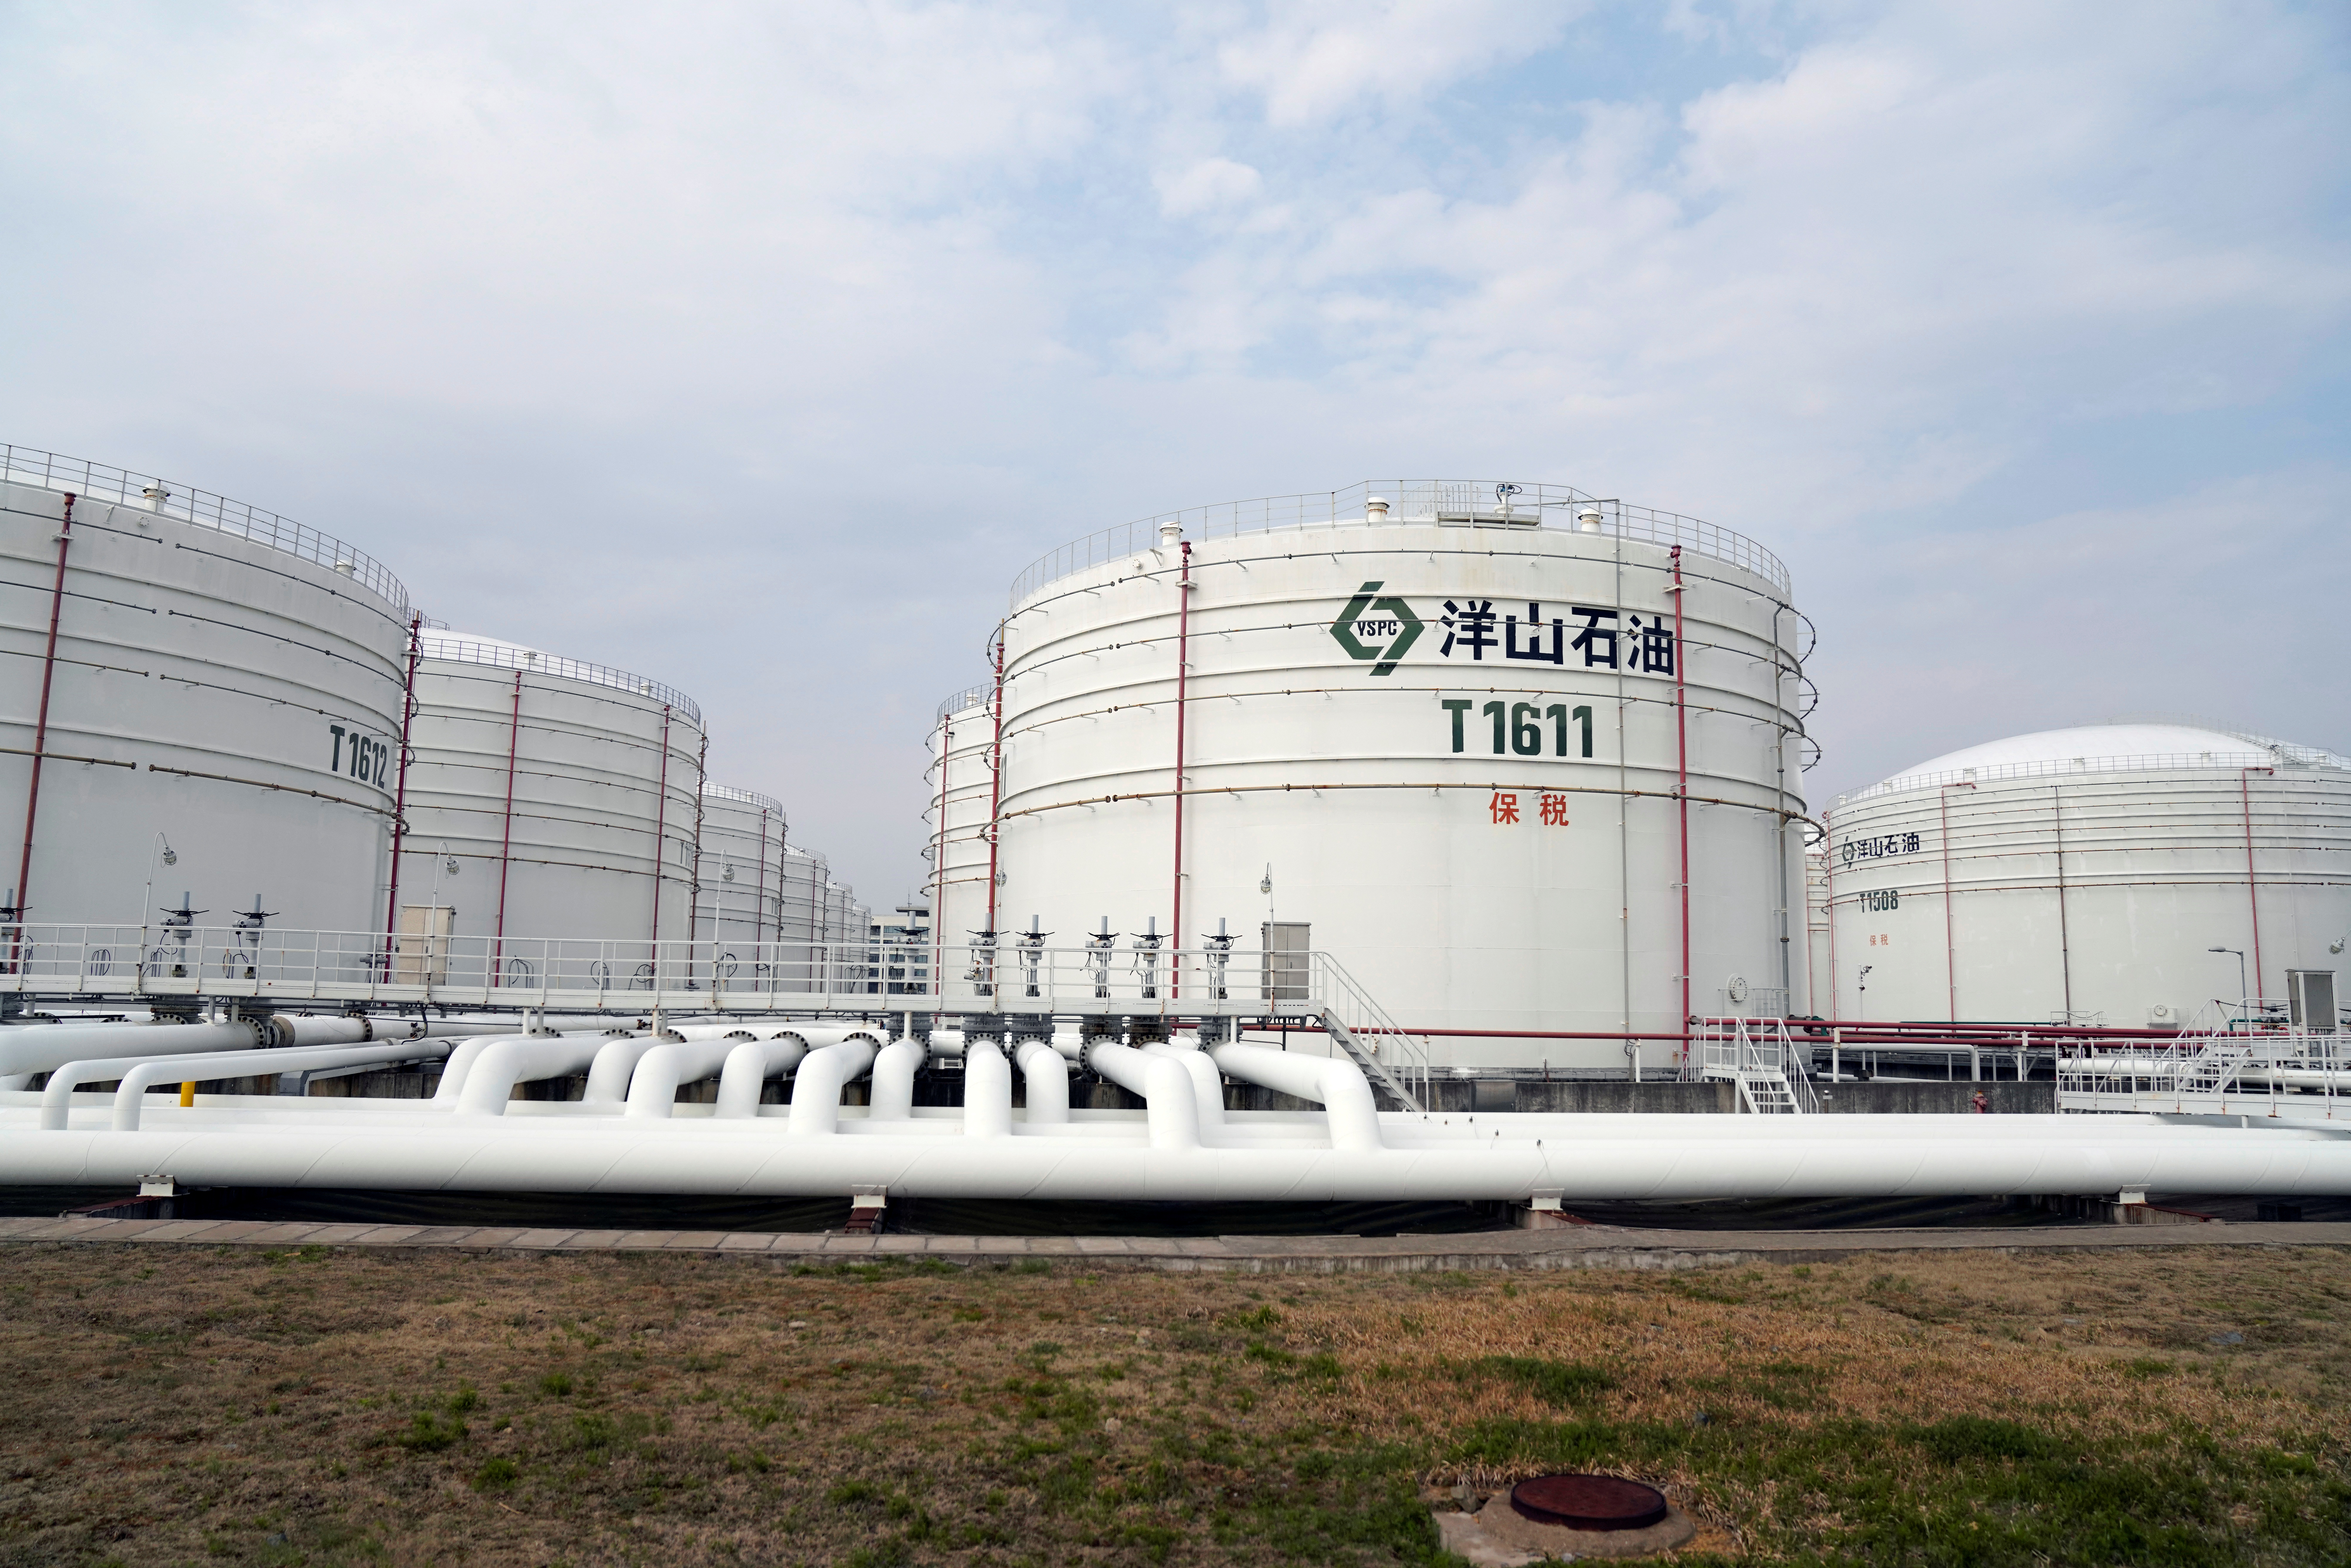 Oil tanks are seen at an oil warehouse at Yangshan port in Shanghai